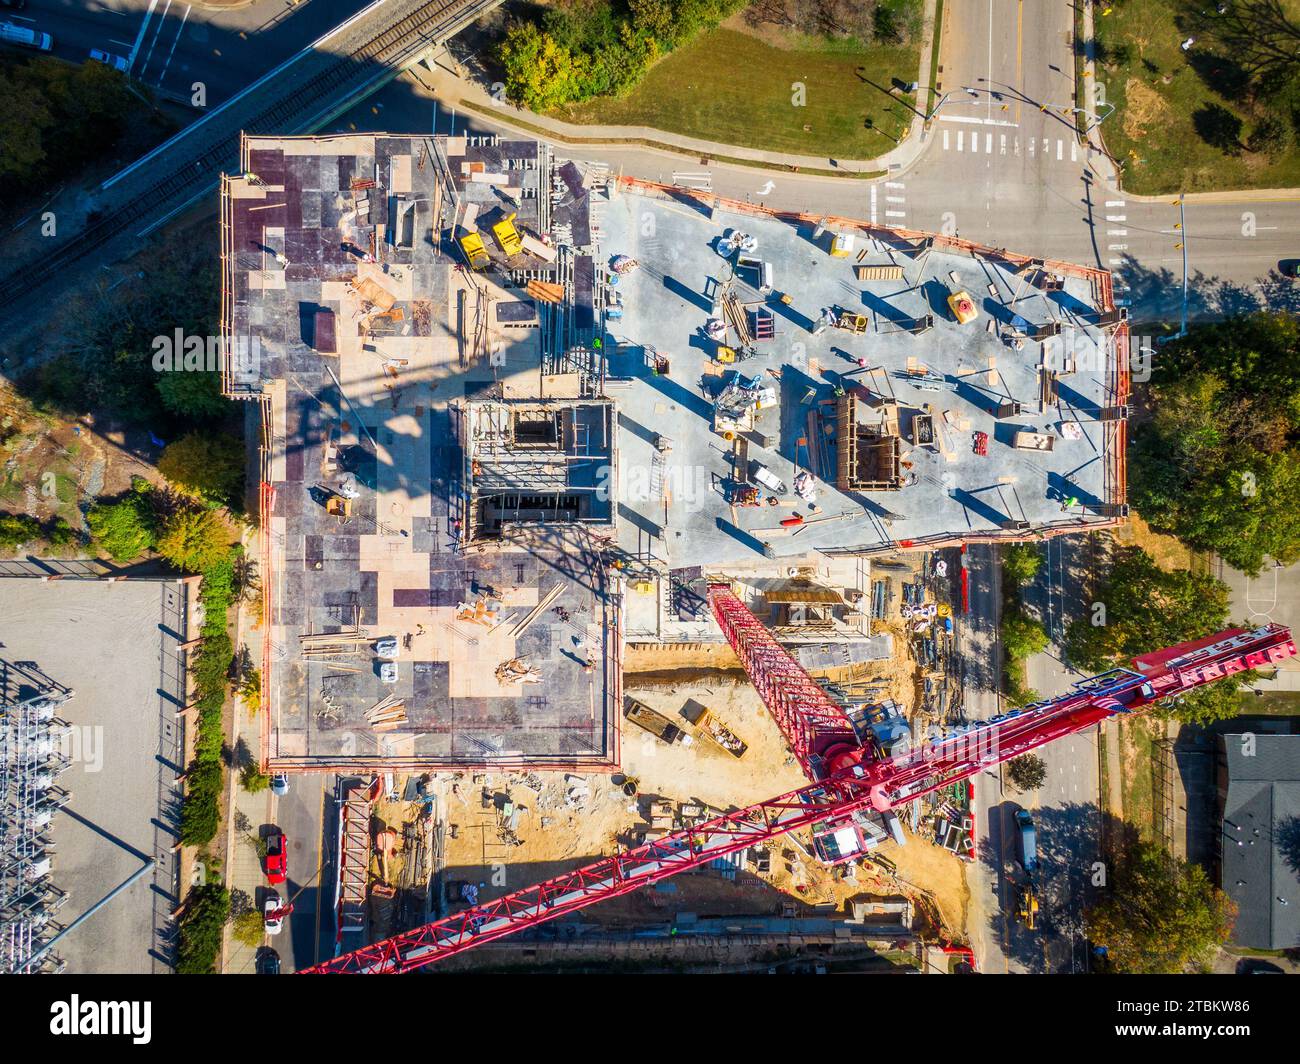 Drone images of downtown raleigh skyline and construction Stock Photo